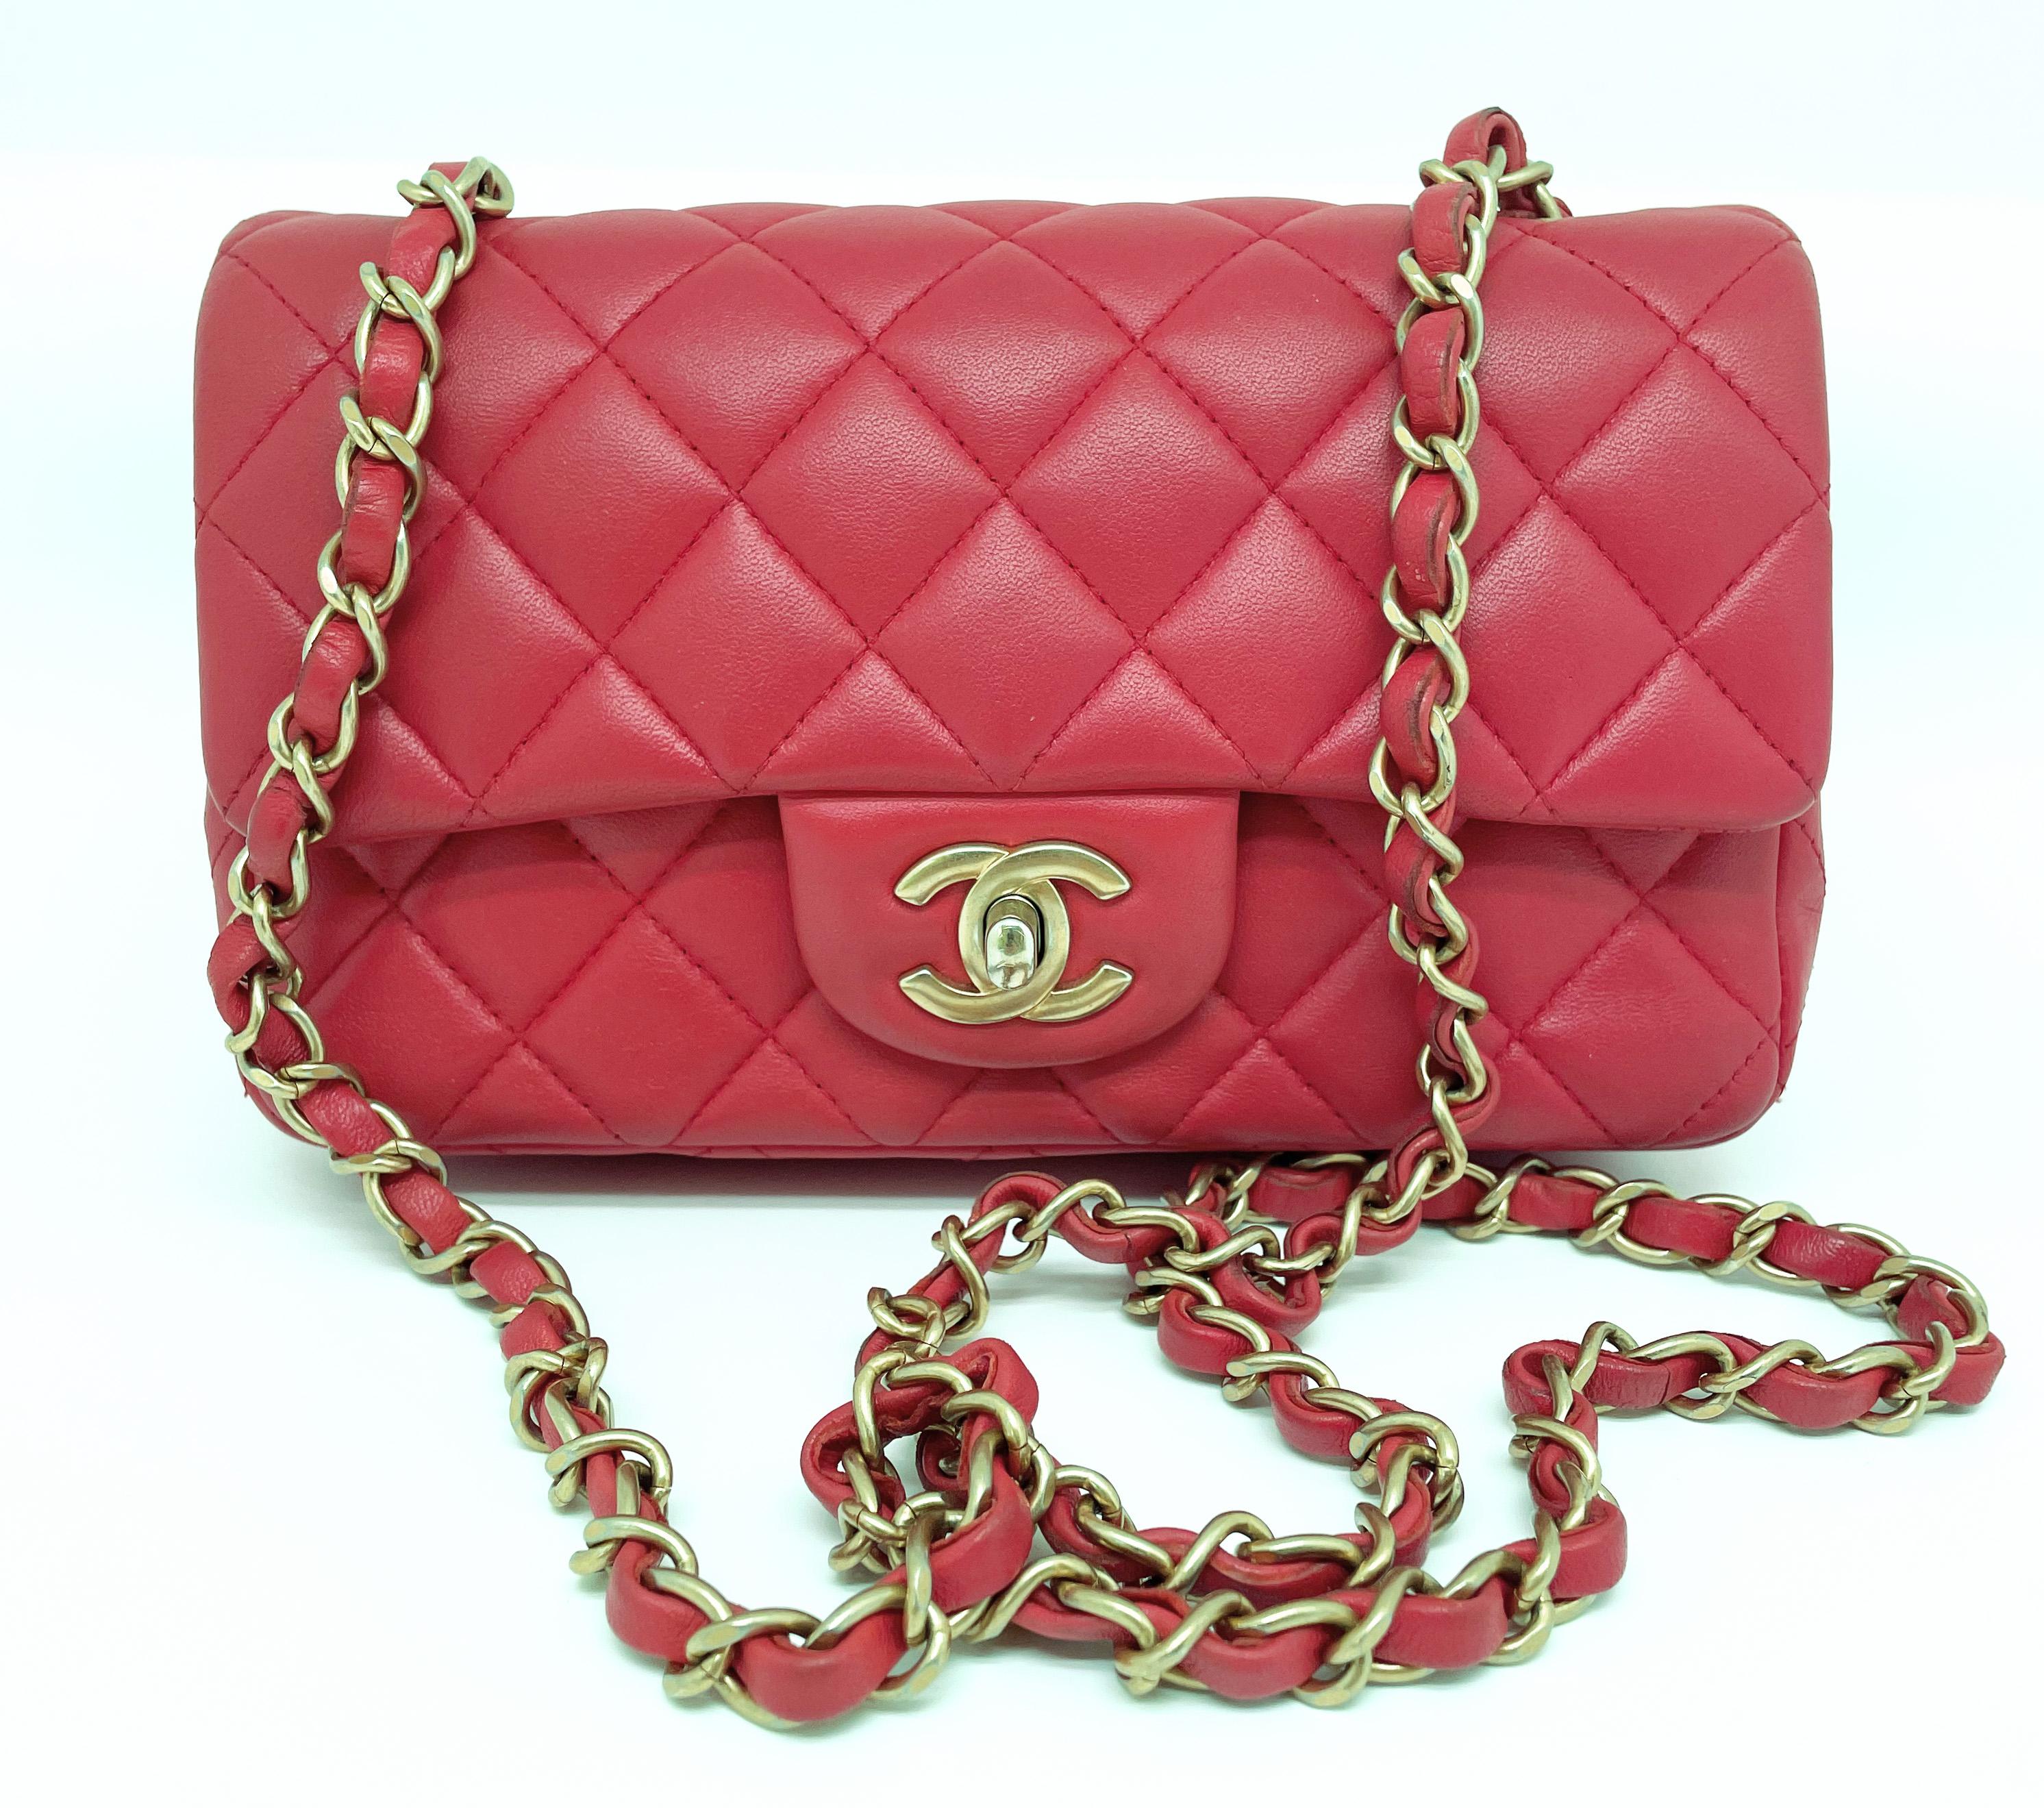 Women's or Men's Chanel Petit Timeless “Must Have” shoulder flap bag in leather of red